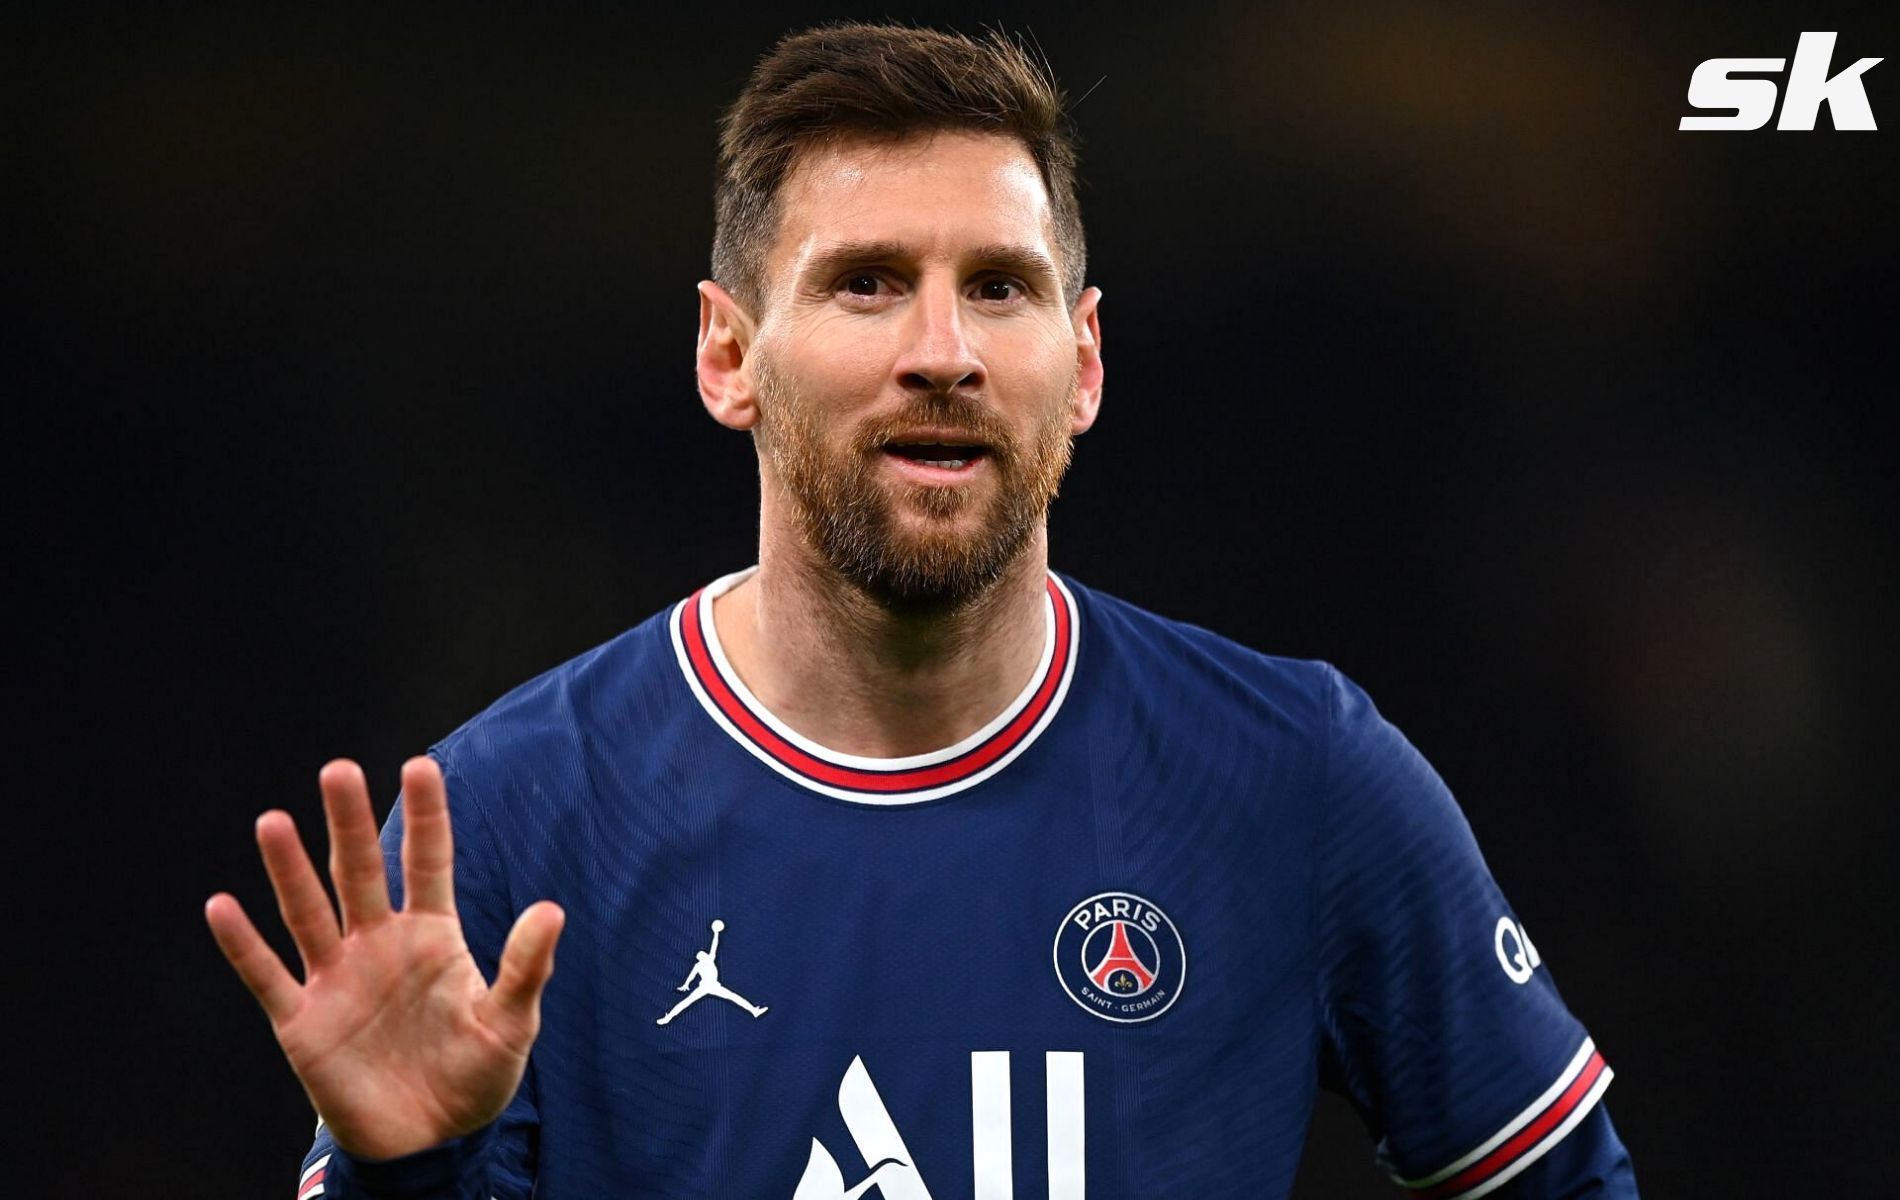 Lionel Messi is yet to find his rhythm at PSG since arriving to Ligue 1 in the summer transfer window.